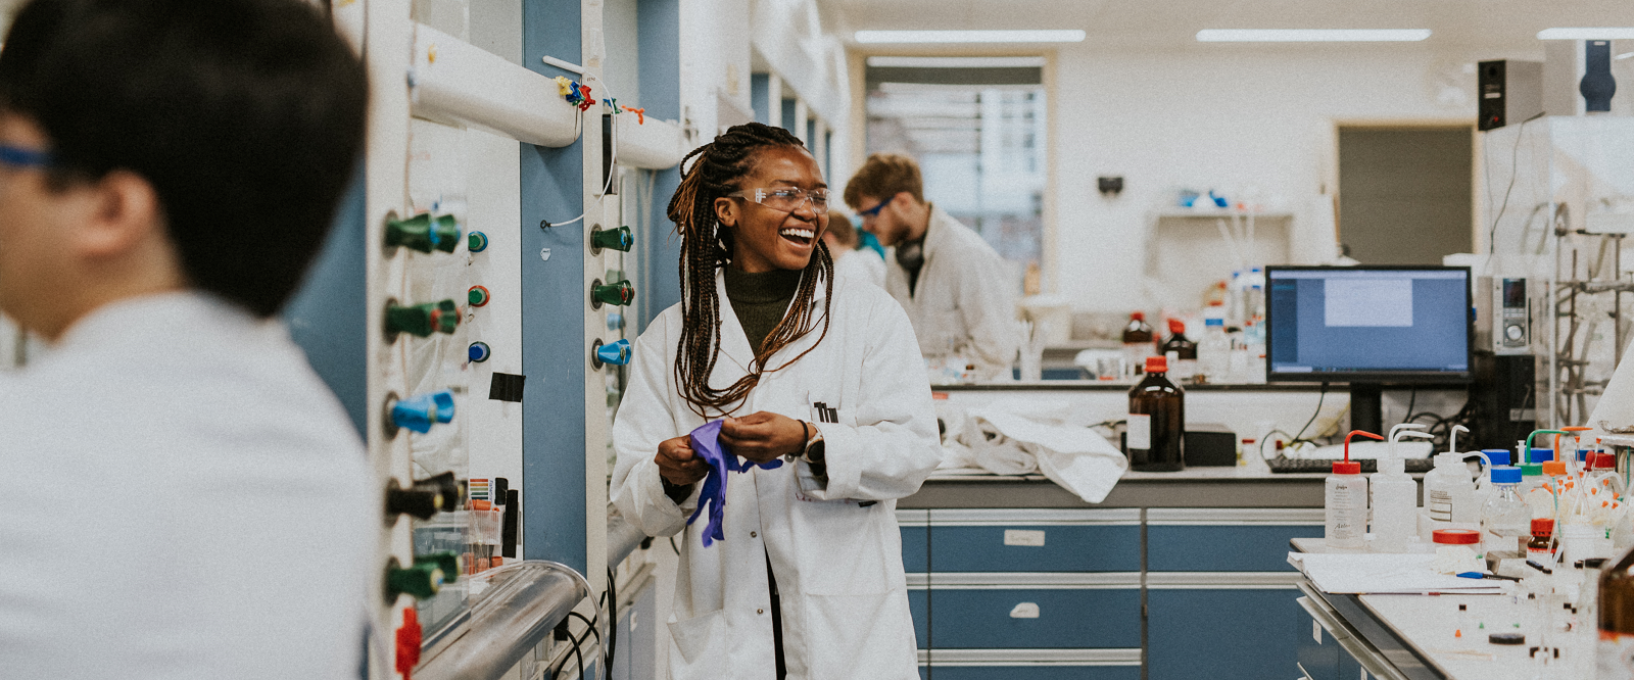 Research in the University of Bristol School of Chemistry lab smiles as she puts on protective gloves